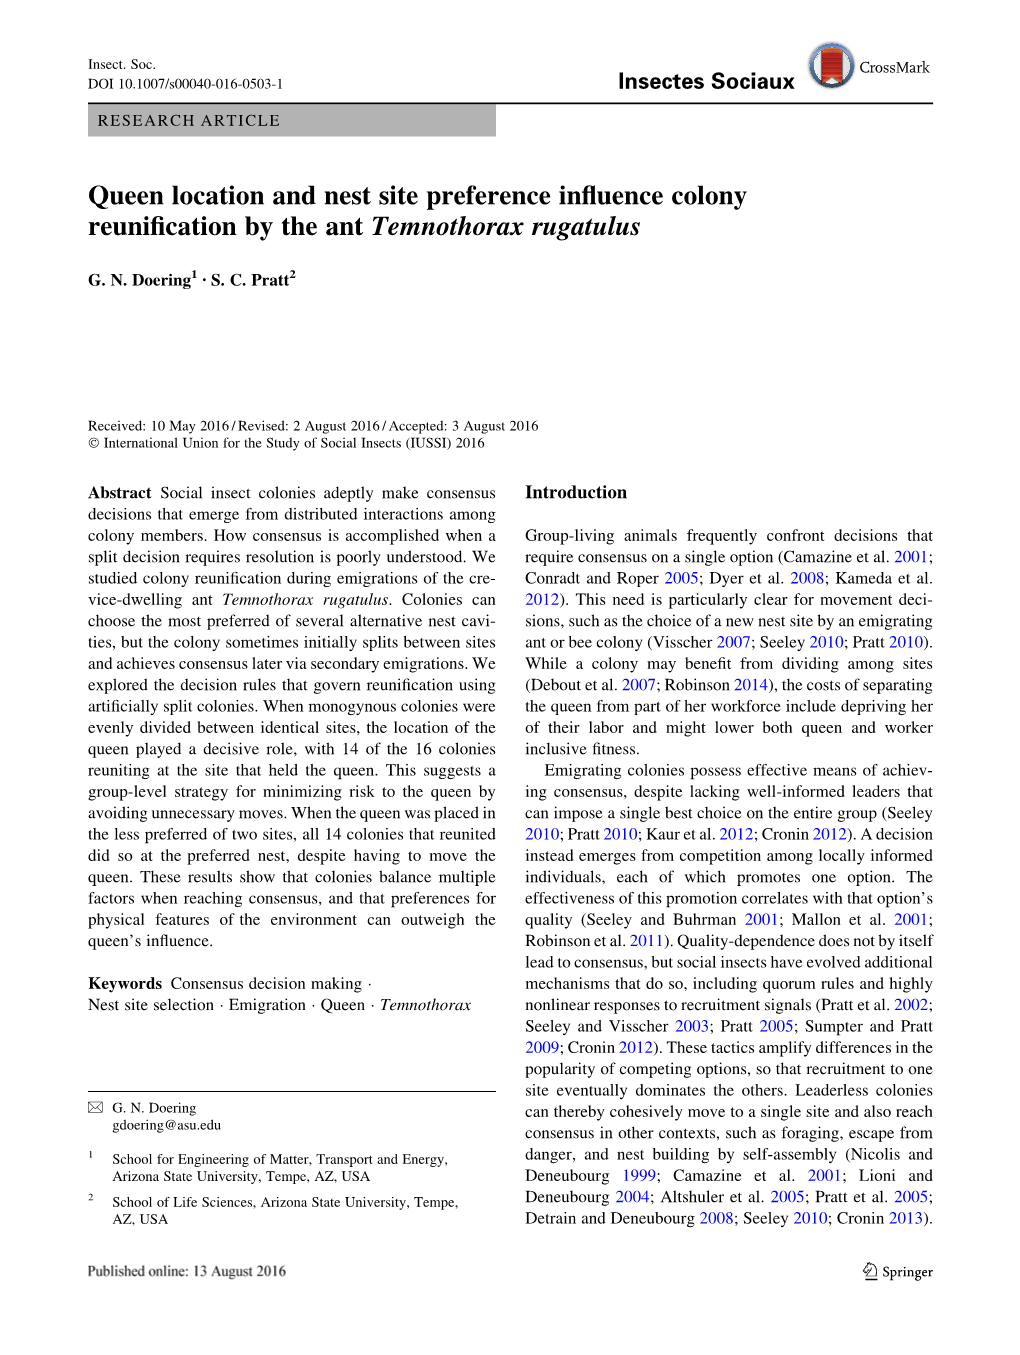 Queen Location and Nest Site Preference Influence Colony Reunification by the Ant Temnothorax Rugatulus